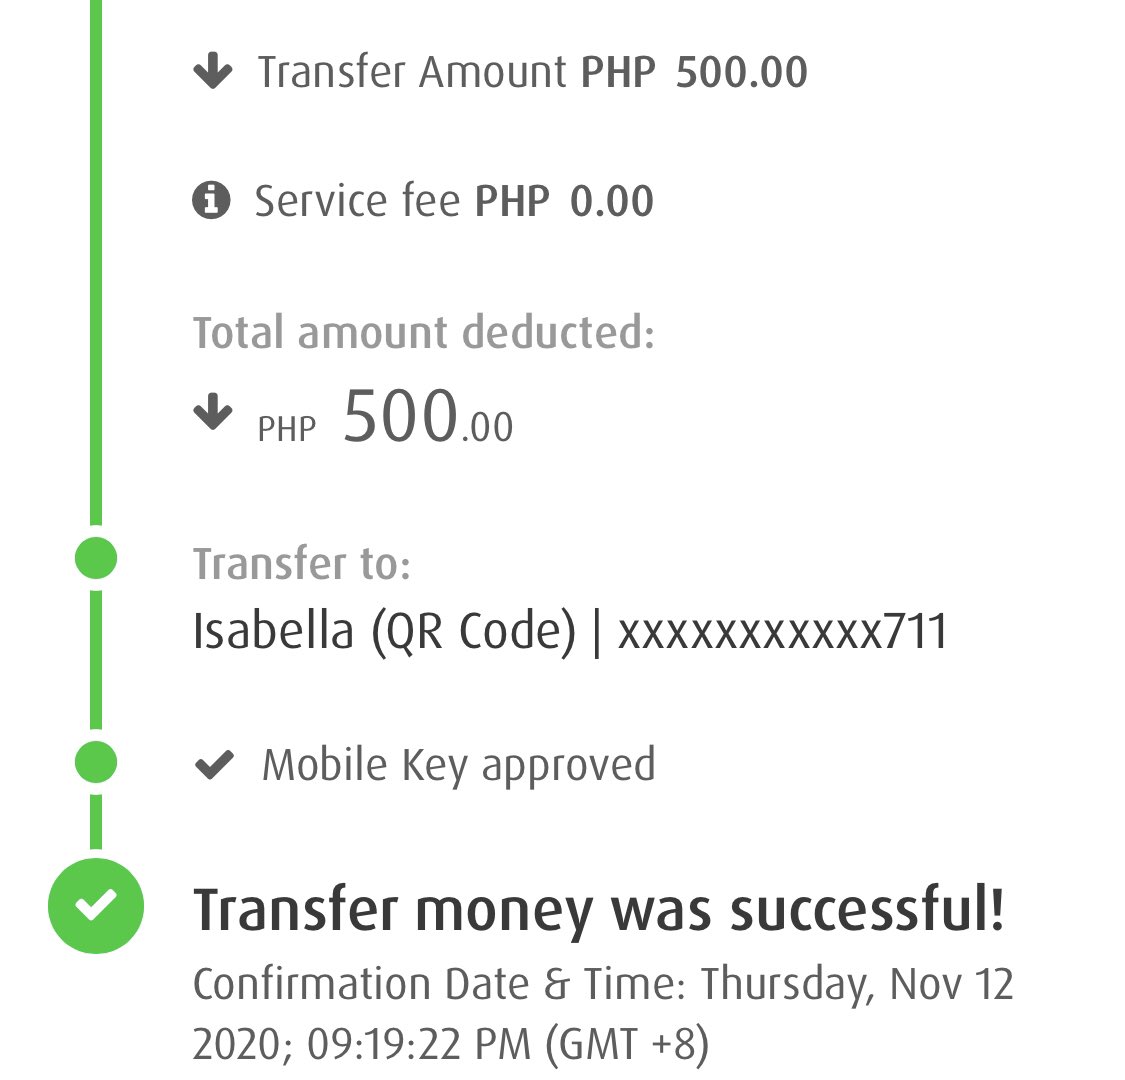 Donated ₱500 to Kids for Kids, a climate and social justice youth org raising funds for immediate and long-term relief to vulnerable communities. Match me.  https://instagram.com/kidsforkidsph 